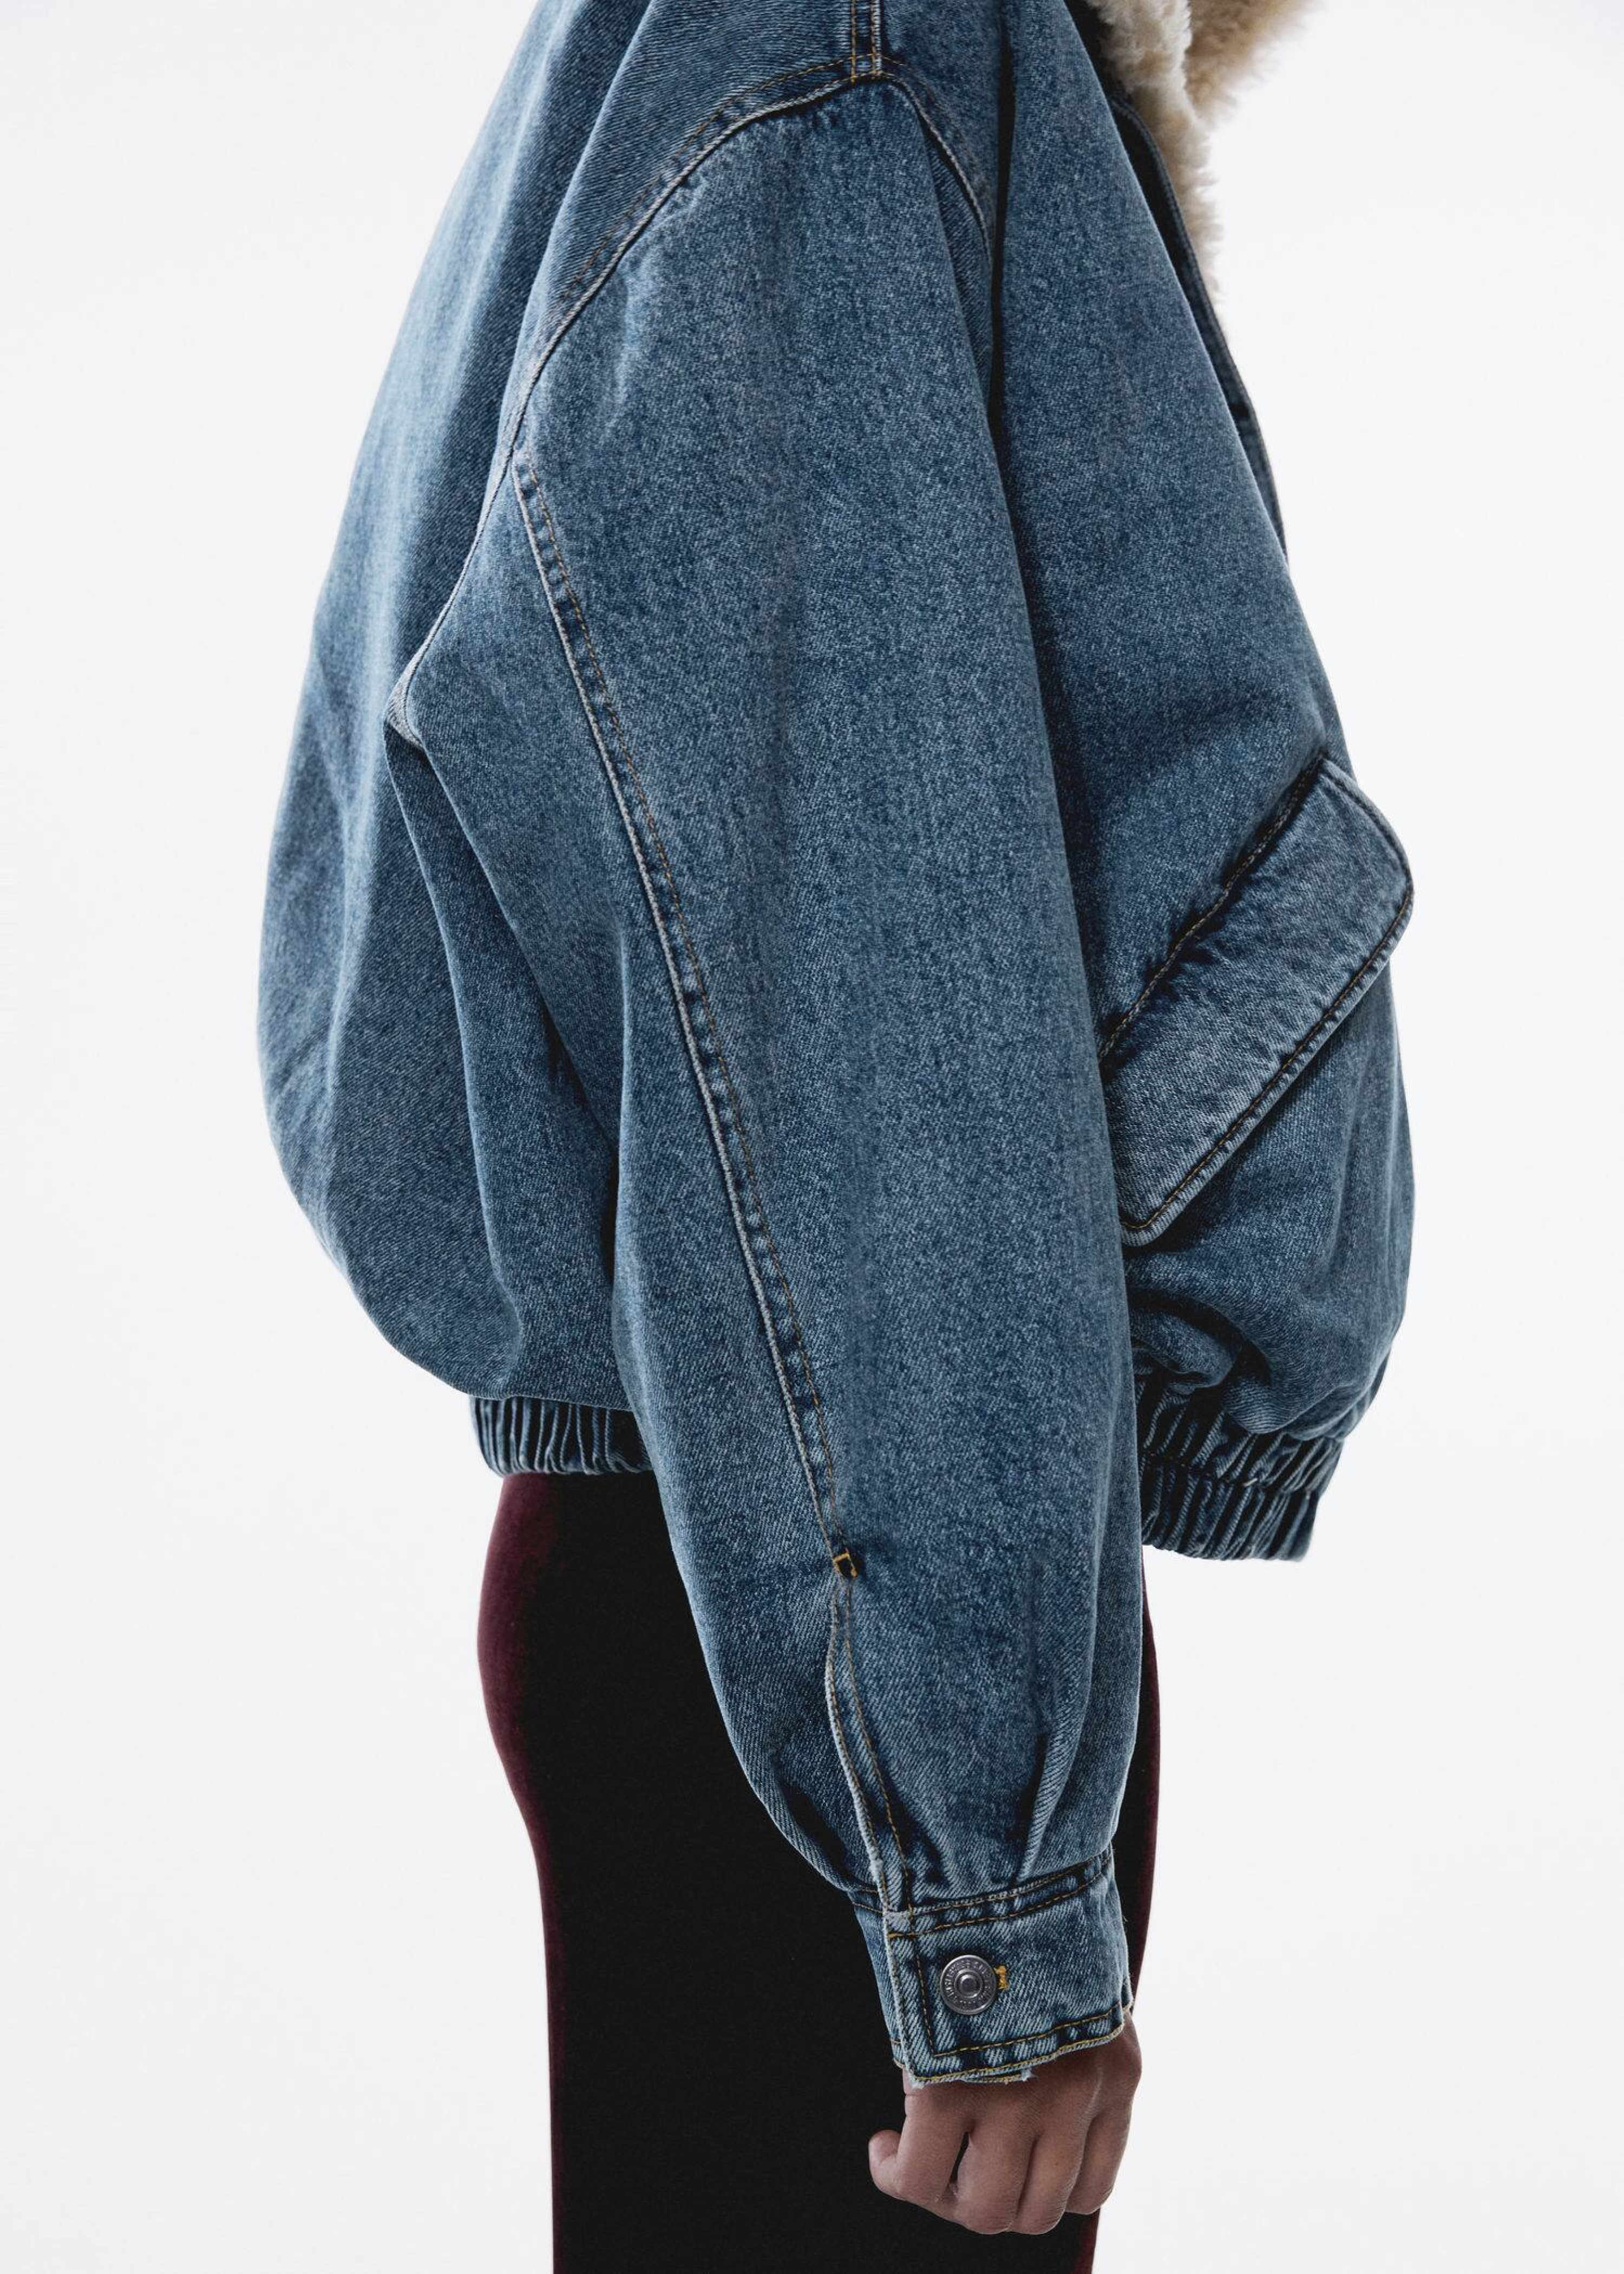 A girl wearing a woman's denim outfit with a bomber jacket.